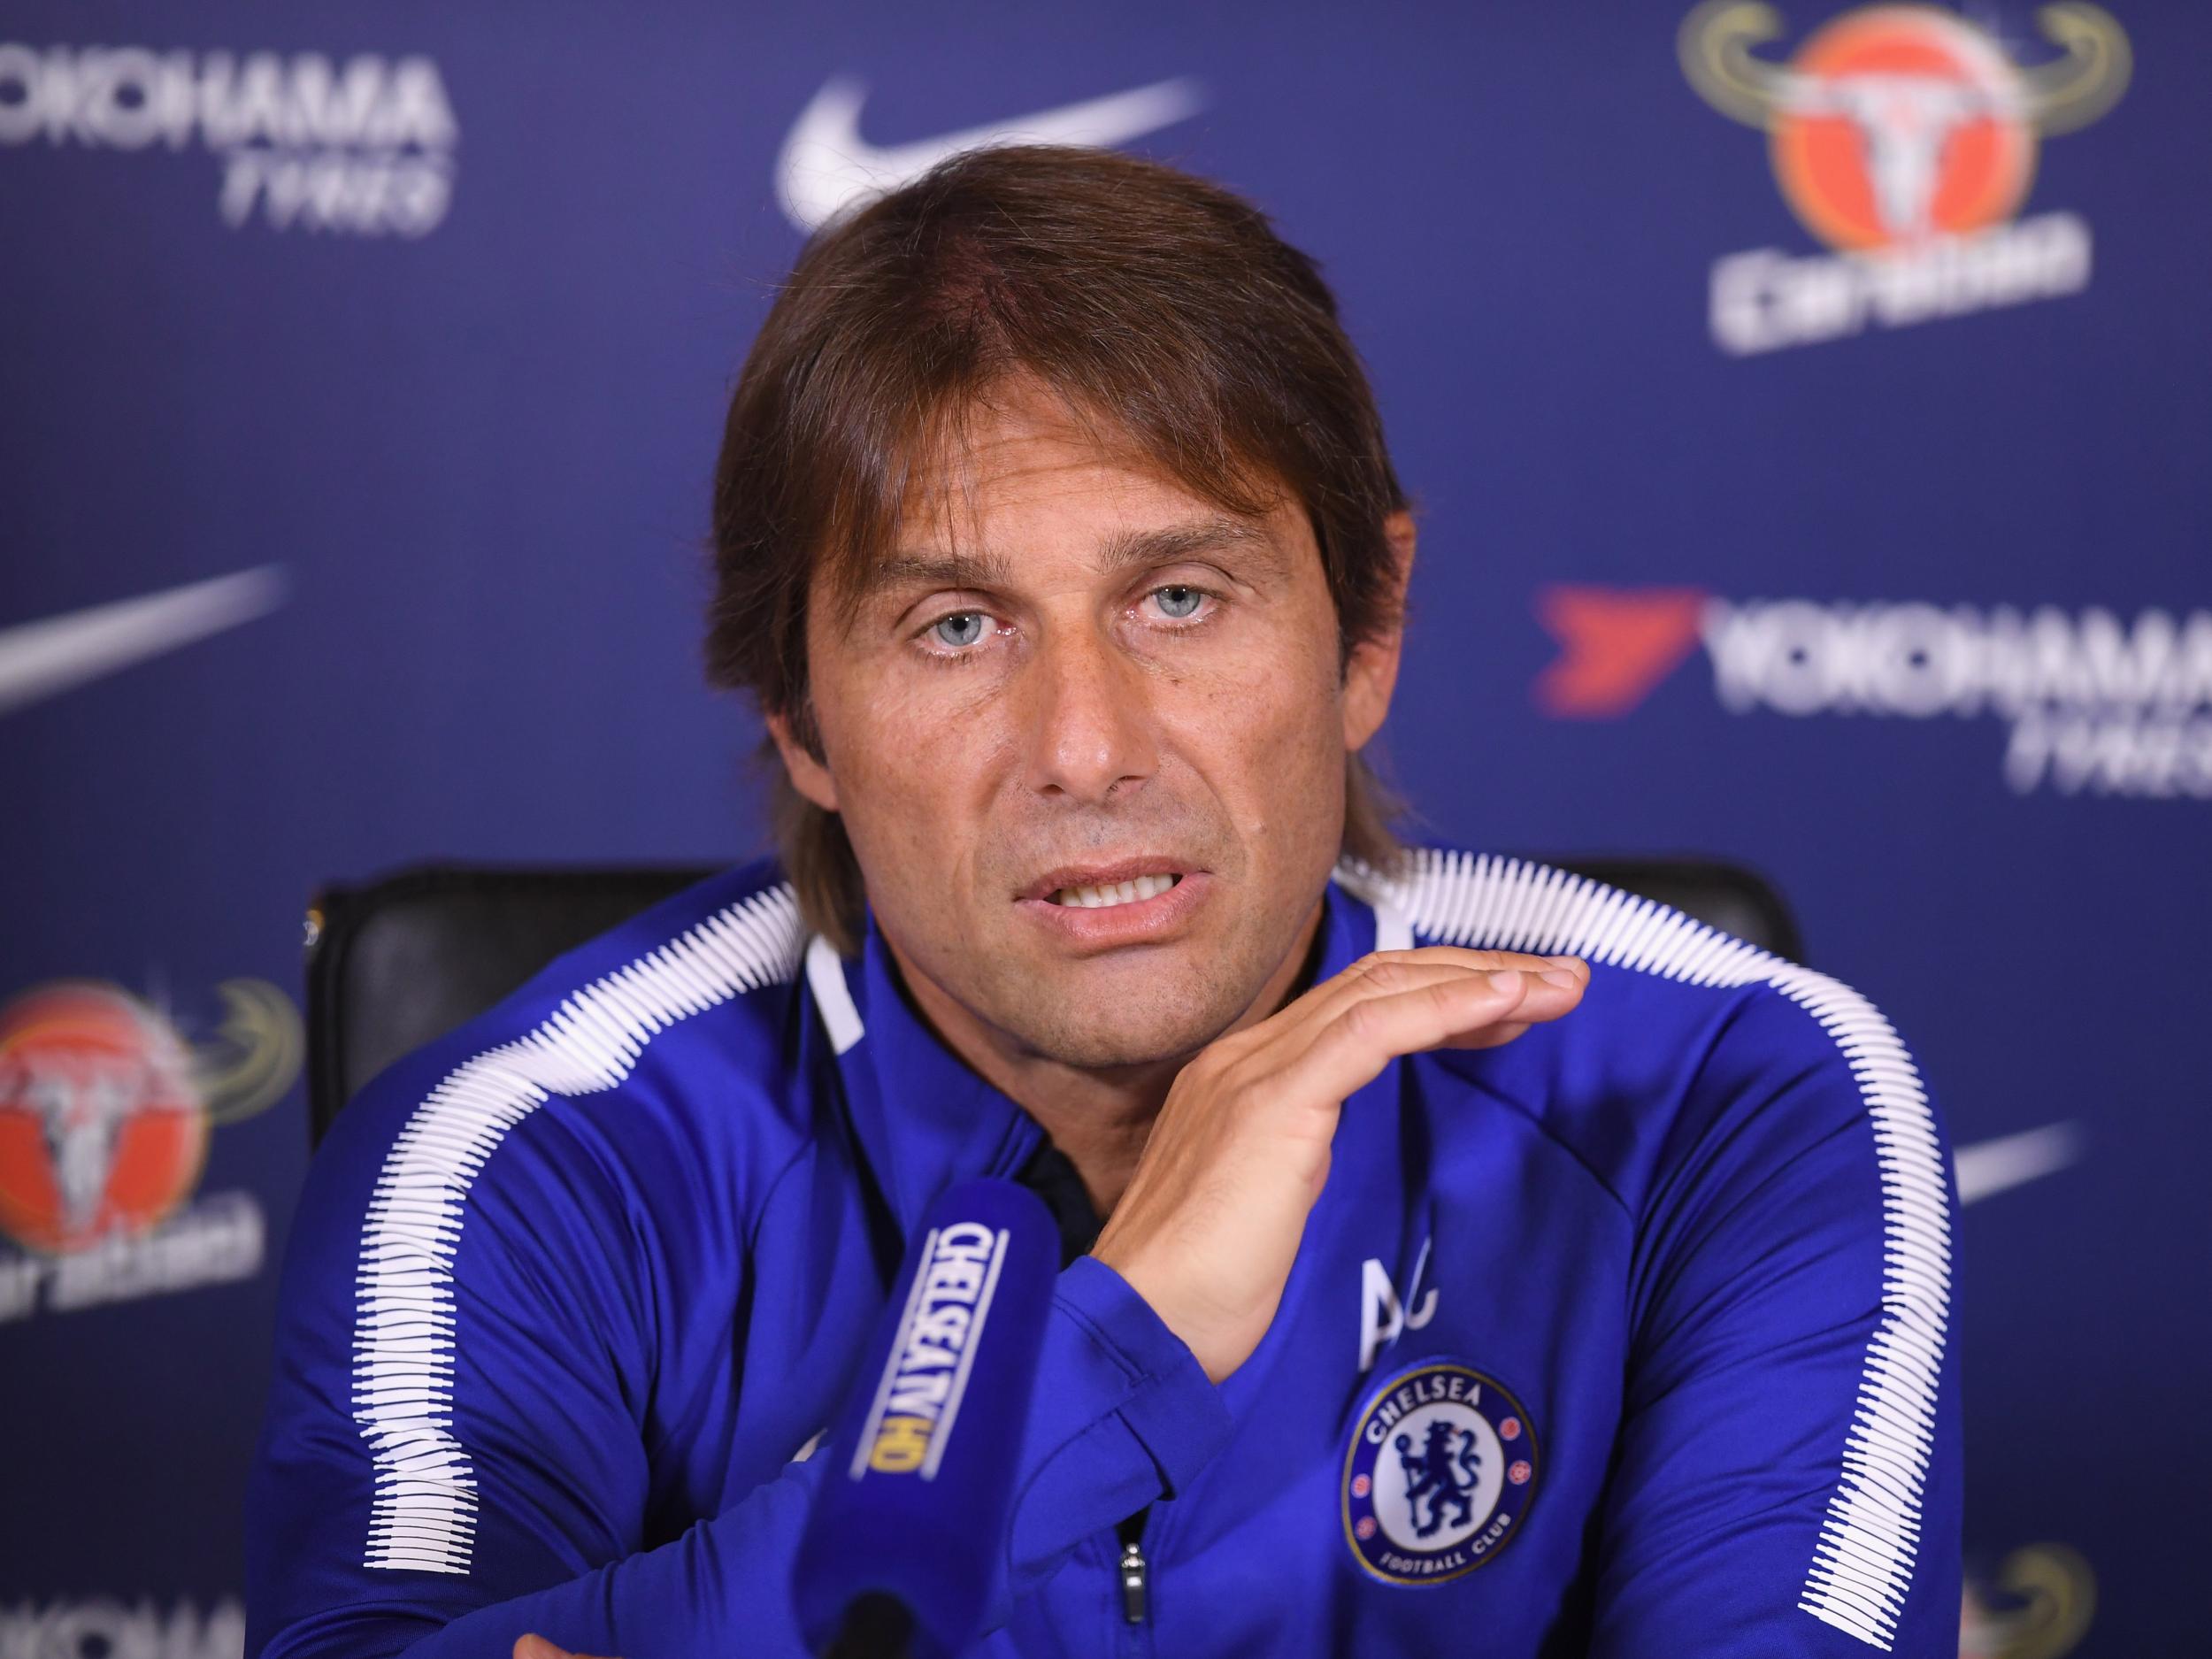 Conte won't say how long he will remain at Chelsea